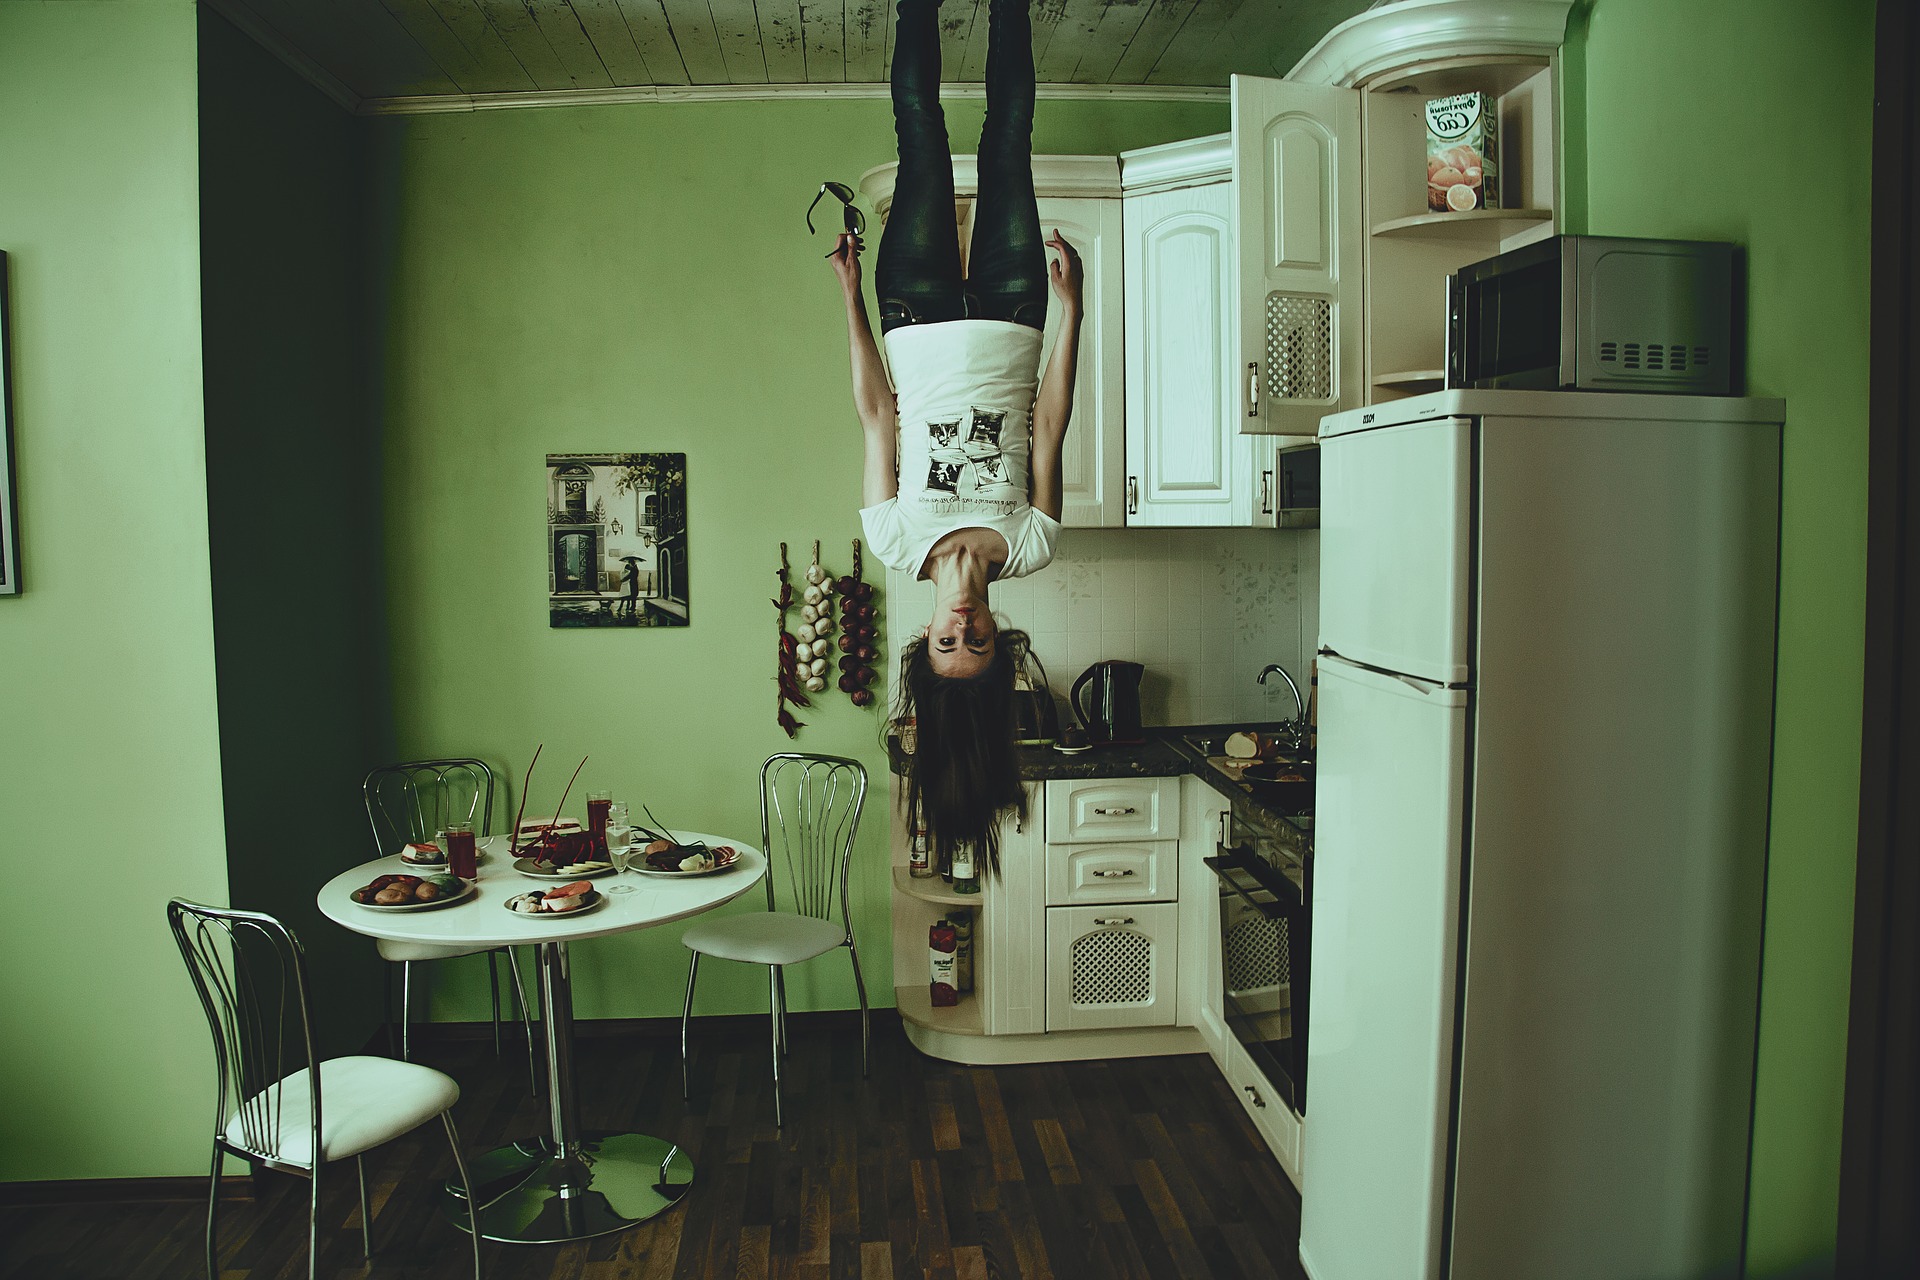 Upside down in the kitchen photo